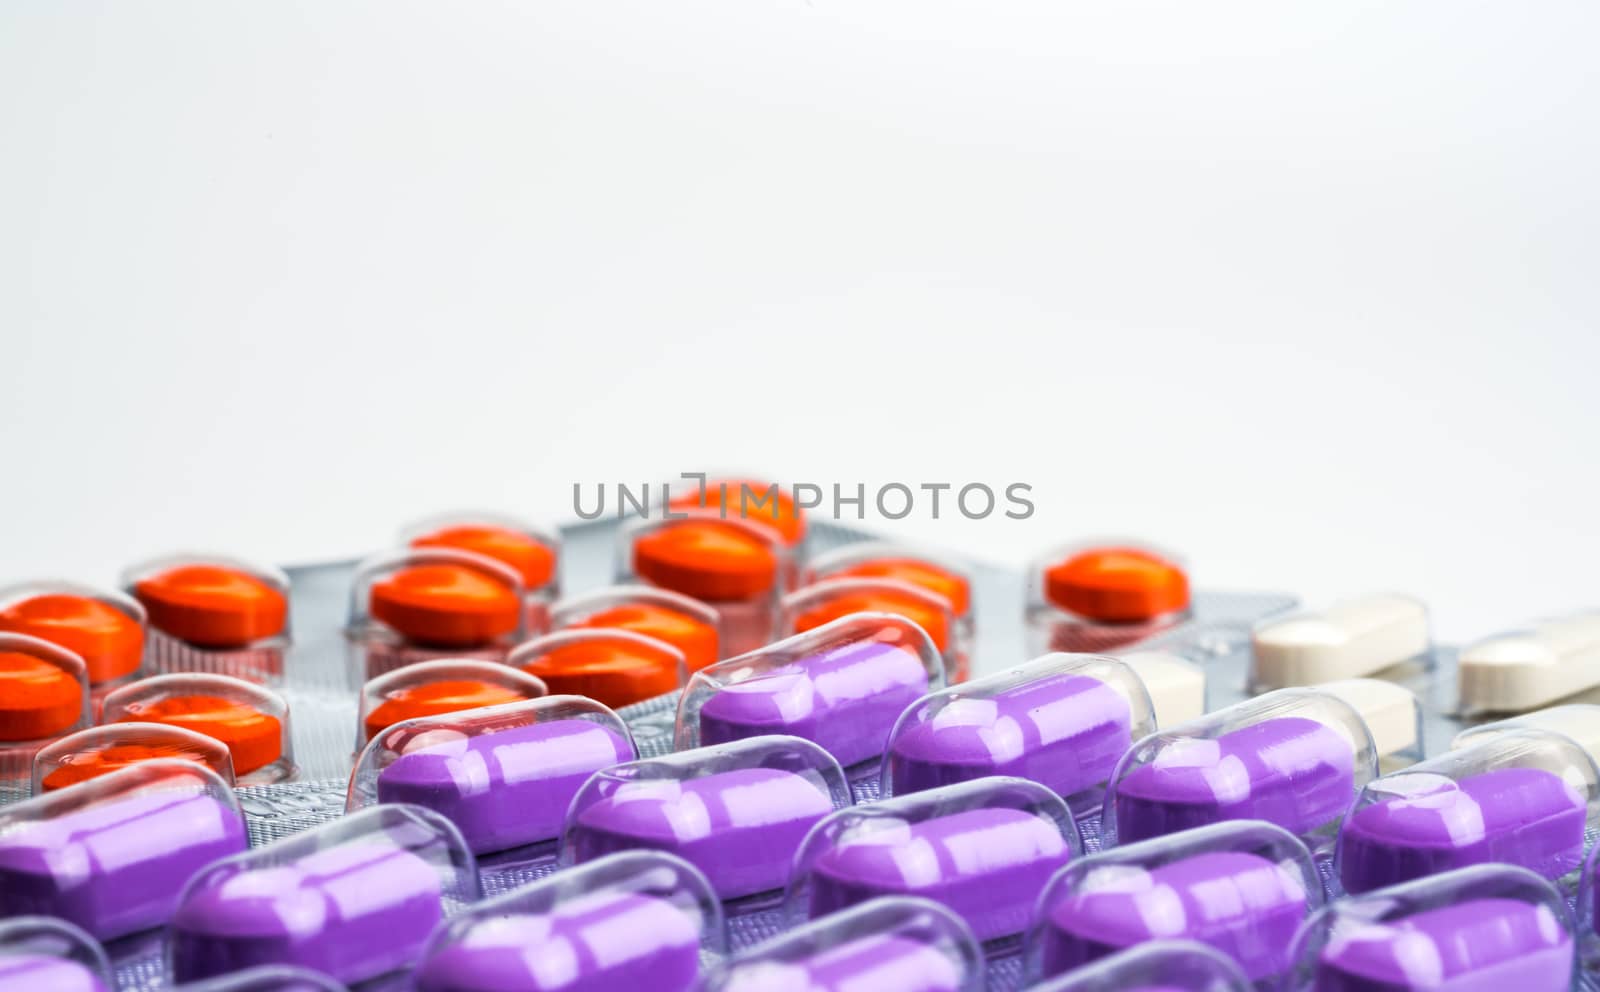 Macro shot detail of orange, purple and white tablets pills in blister pack on white background. Colorful medicine for relieve pain. NSAIDs drug for anti-inflammation can cause gastric ulcer. Pharmaceutical packaging industry. Pharmacy background. Global healthcare concept. by Fahroni